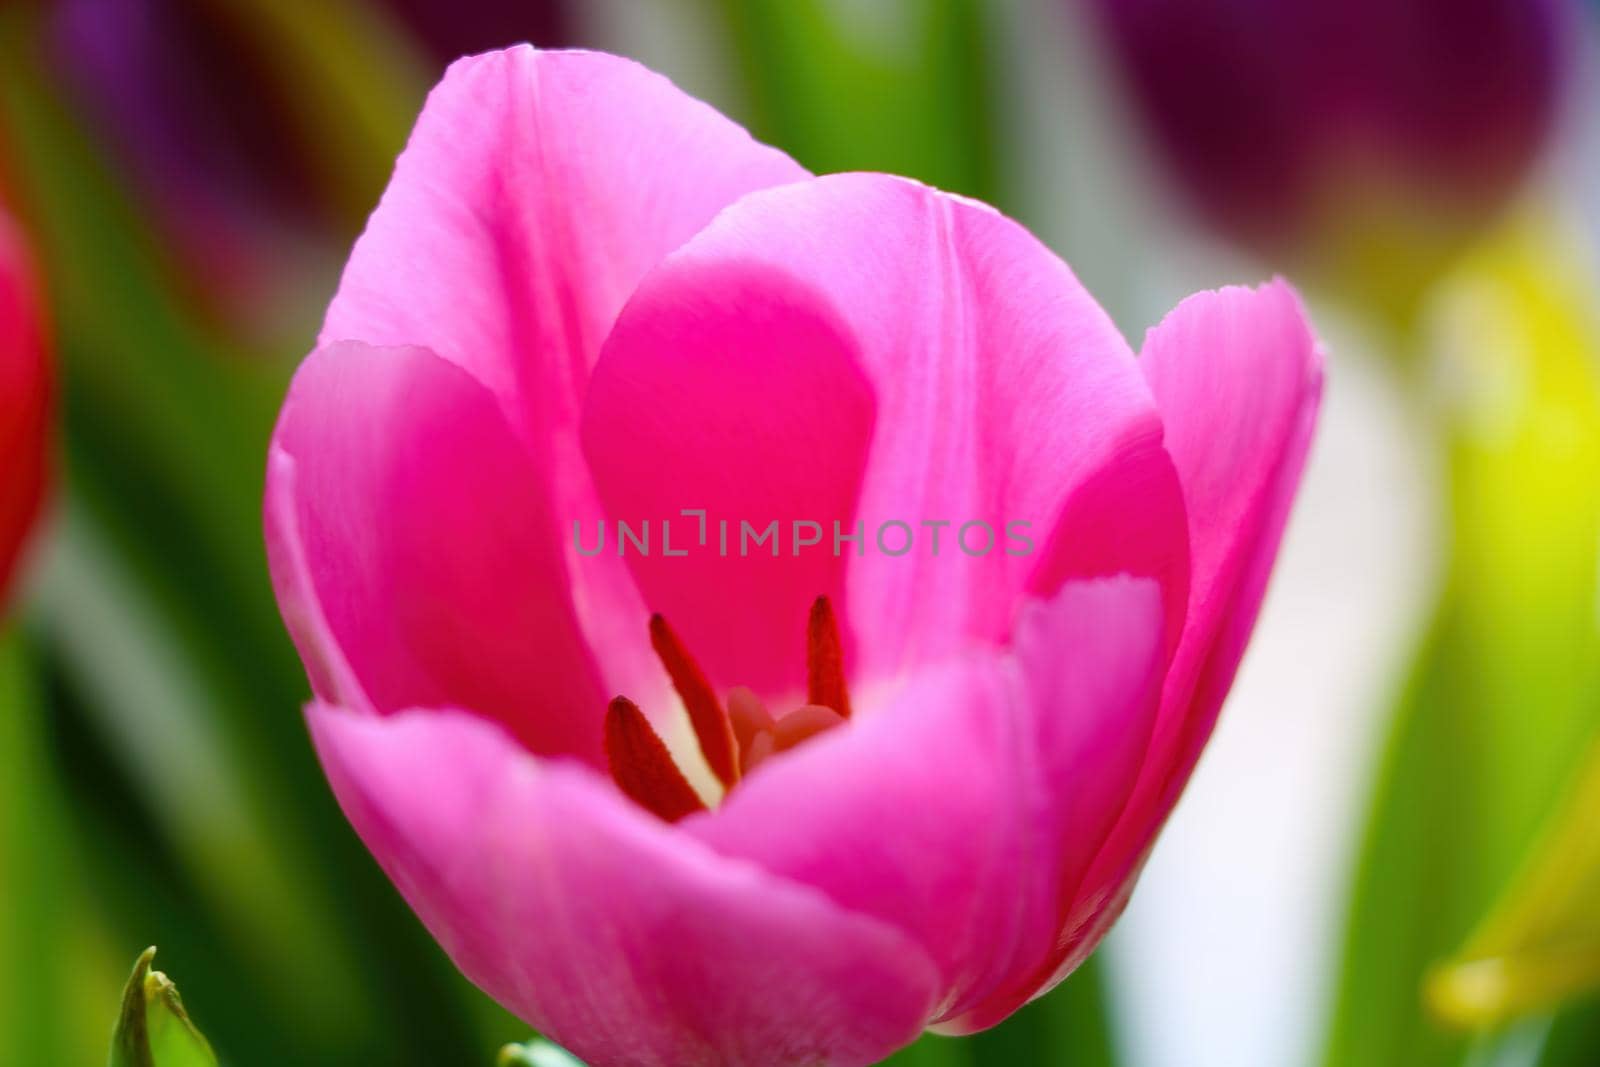 Blooming pink tulip in the garden on a sunny day